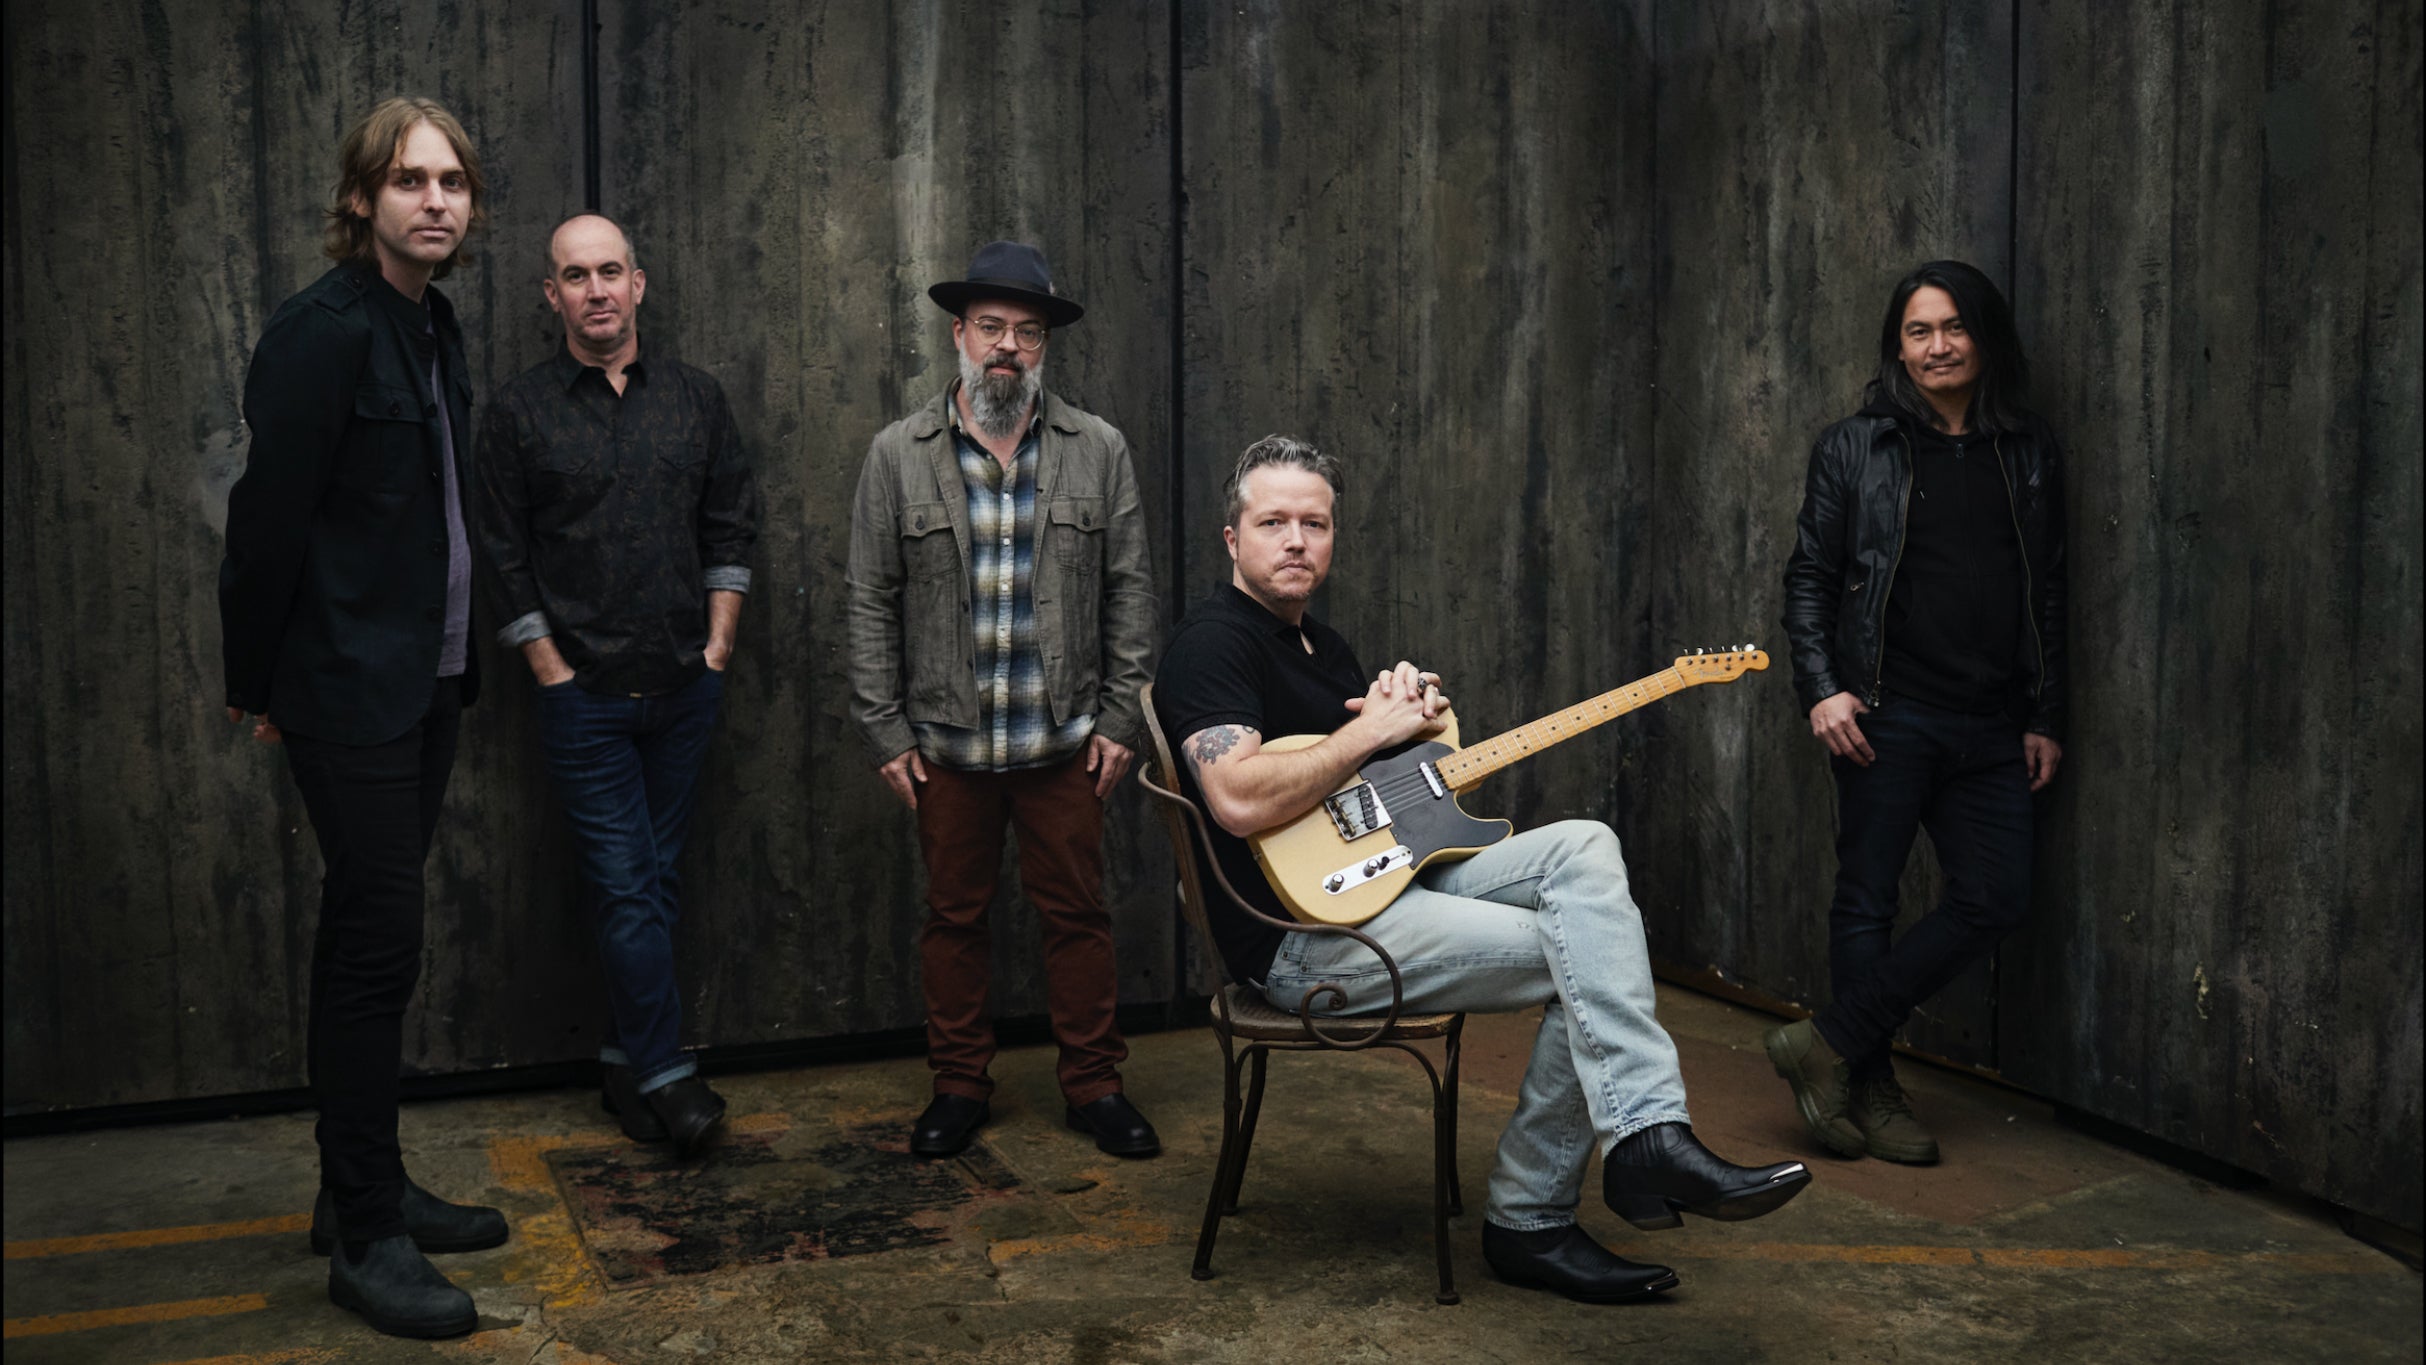 Jason Isbell and the 400 Unit free presale pa55w0rd for early tickets in Huntington